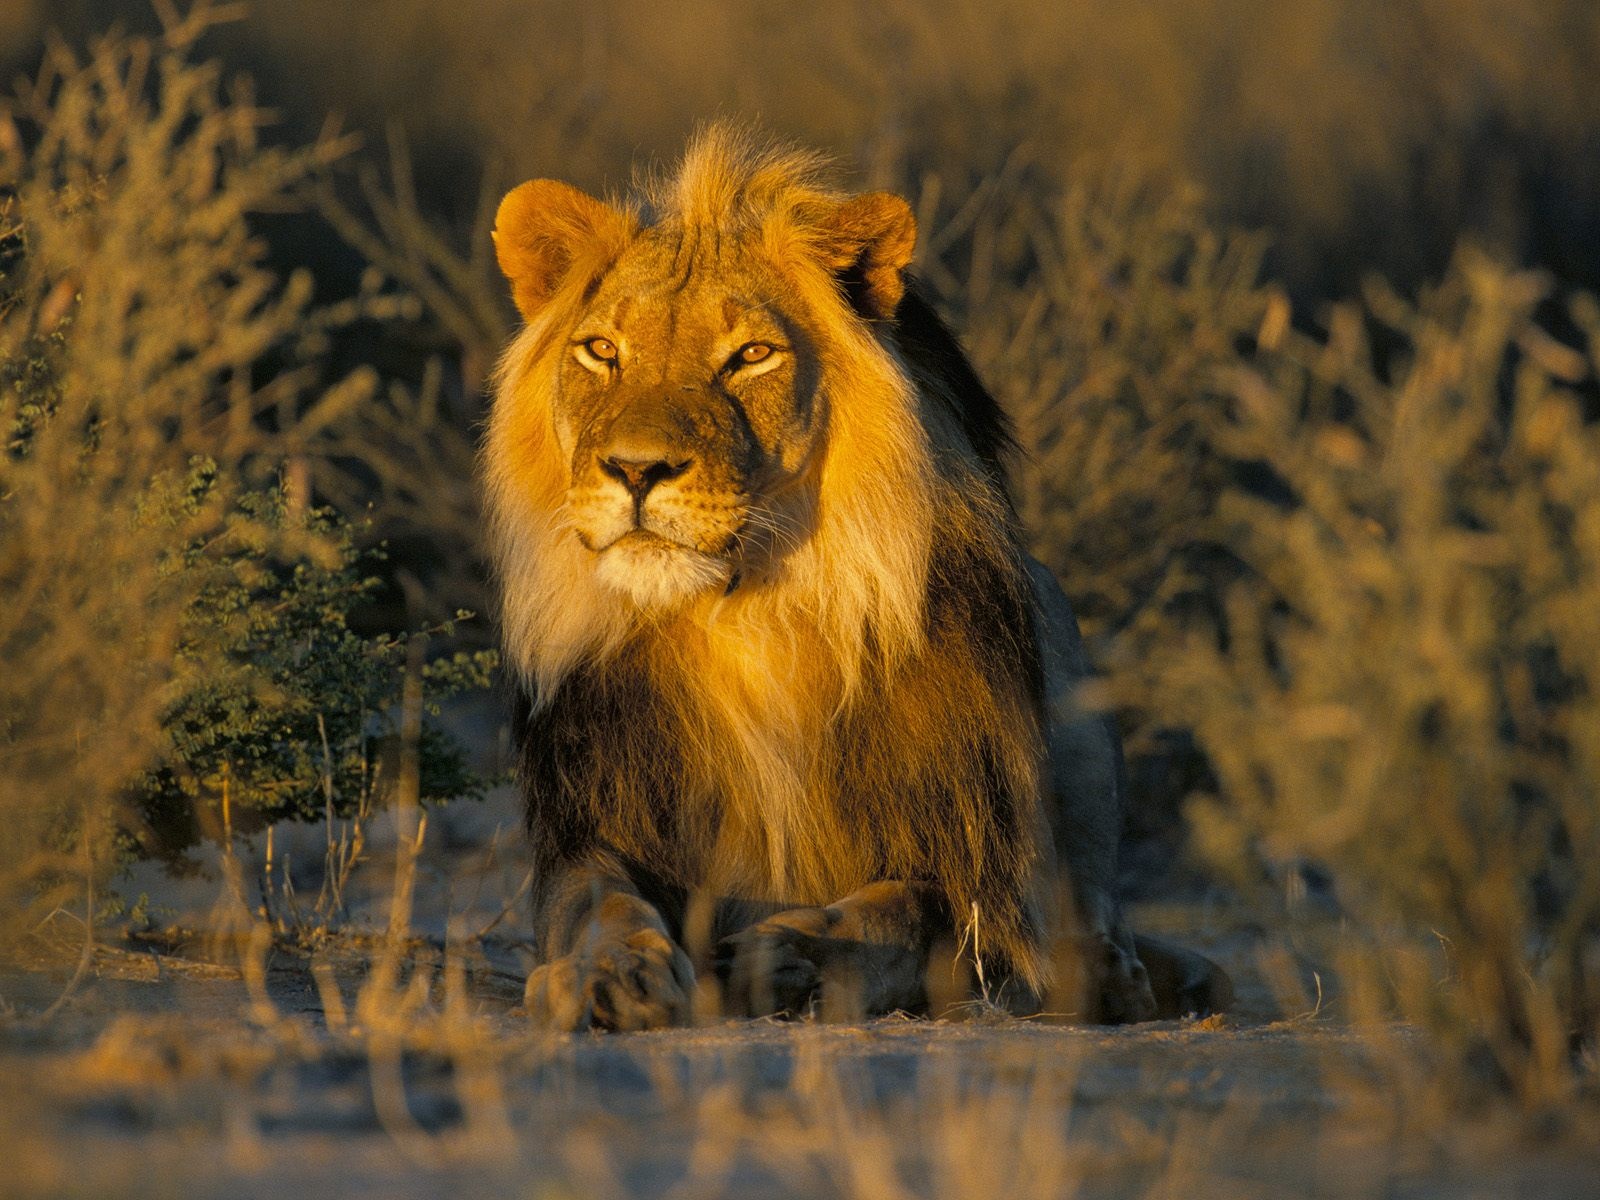 Lions Picture Attack Wild Lion Pictures Of